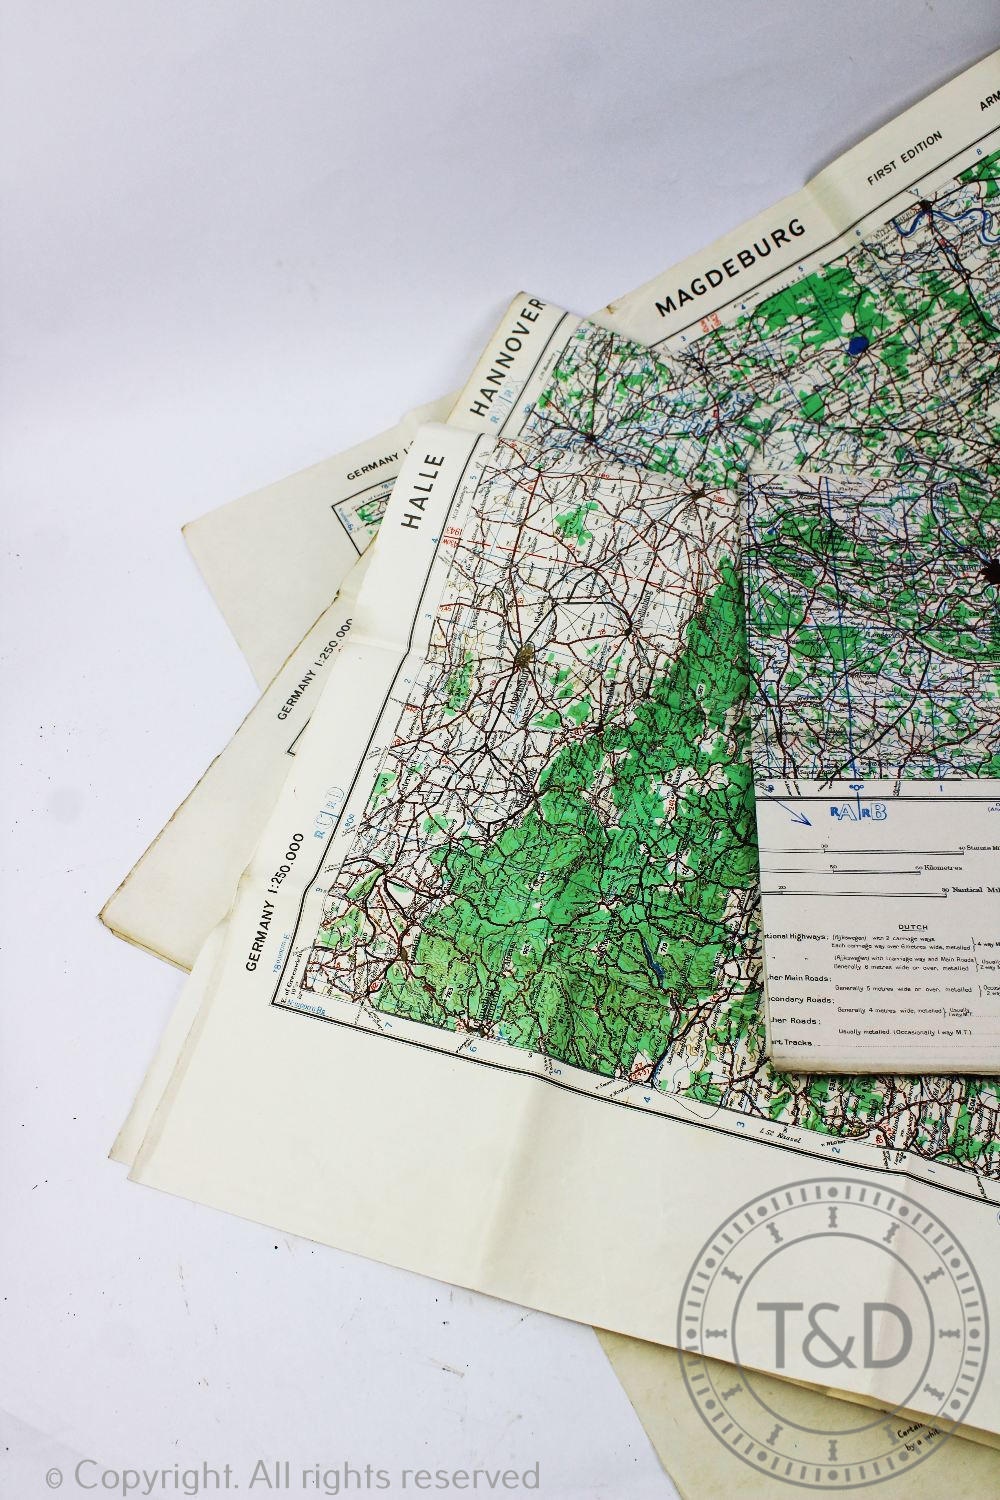 Four World War II War Office maps, titled Halle, Hannover, Osnabruck and Magdeburg,